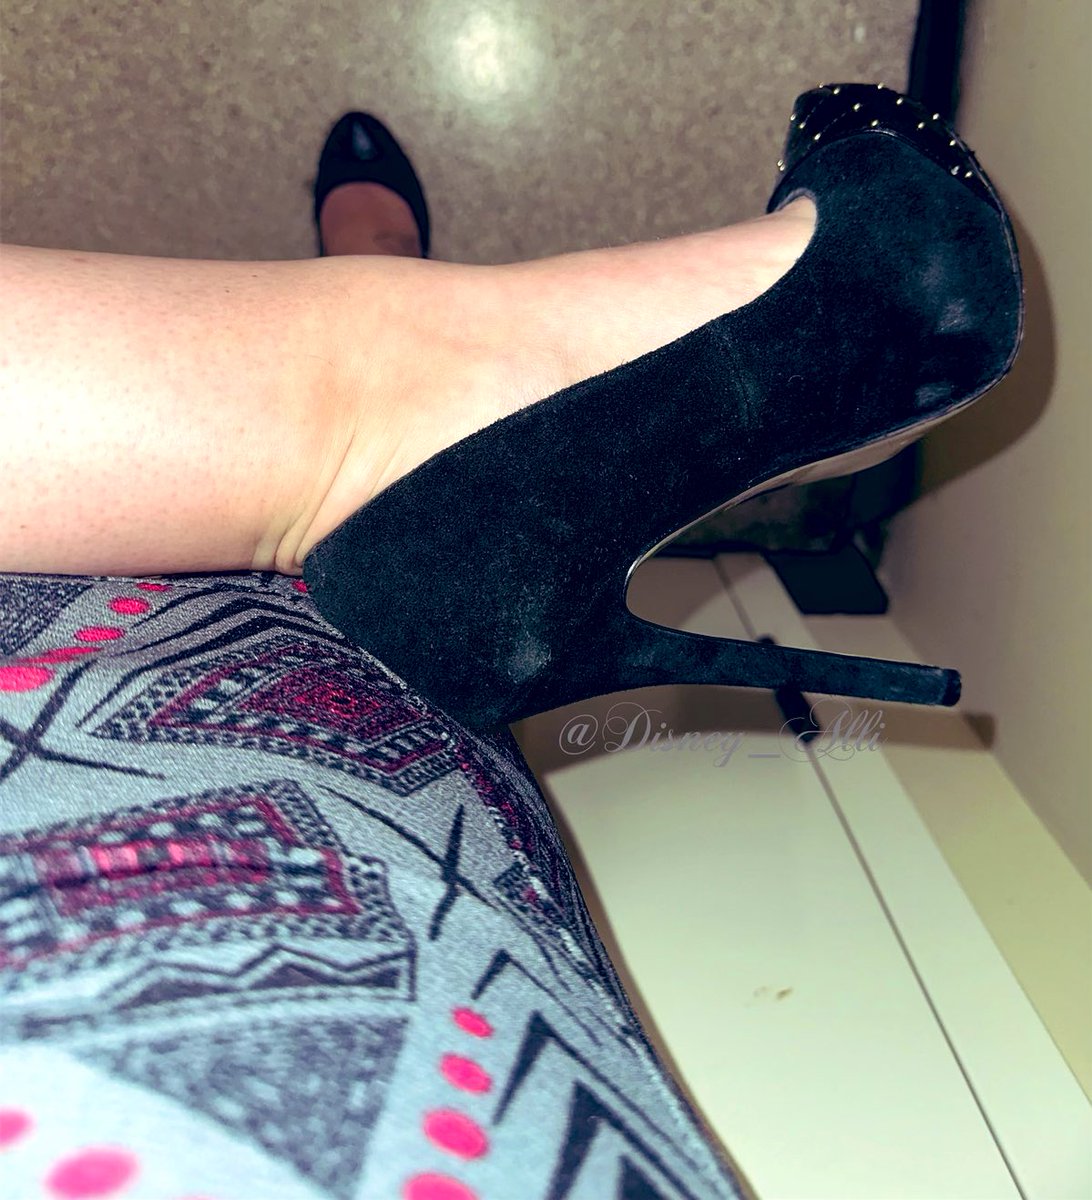 It’s a @stevemadden night yet again #shoes #shoefie #shoesoftheday #sotd #outfitoftheday #ootd #highheeledshoes #pumps #highheellife #highheellover #highheeladdict #shoelover #shoefreak #shoeporn #shoewhore #shoeaddict #shoeaholic #shoeaddiction #heelsporn #heels #showoff